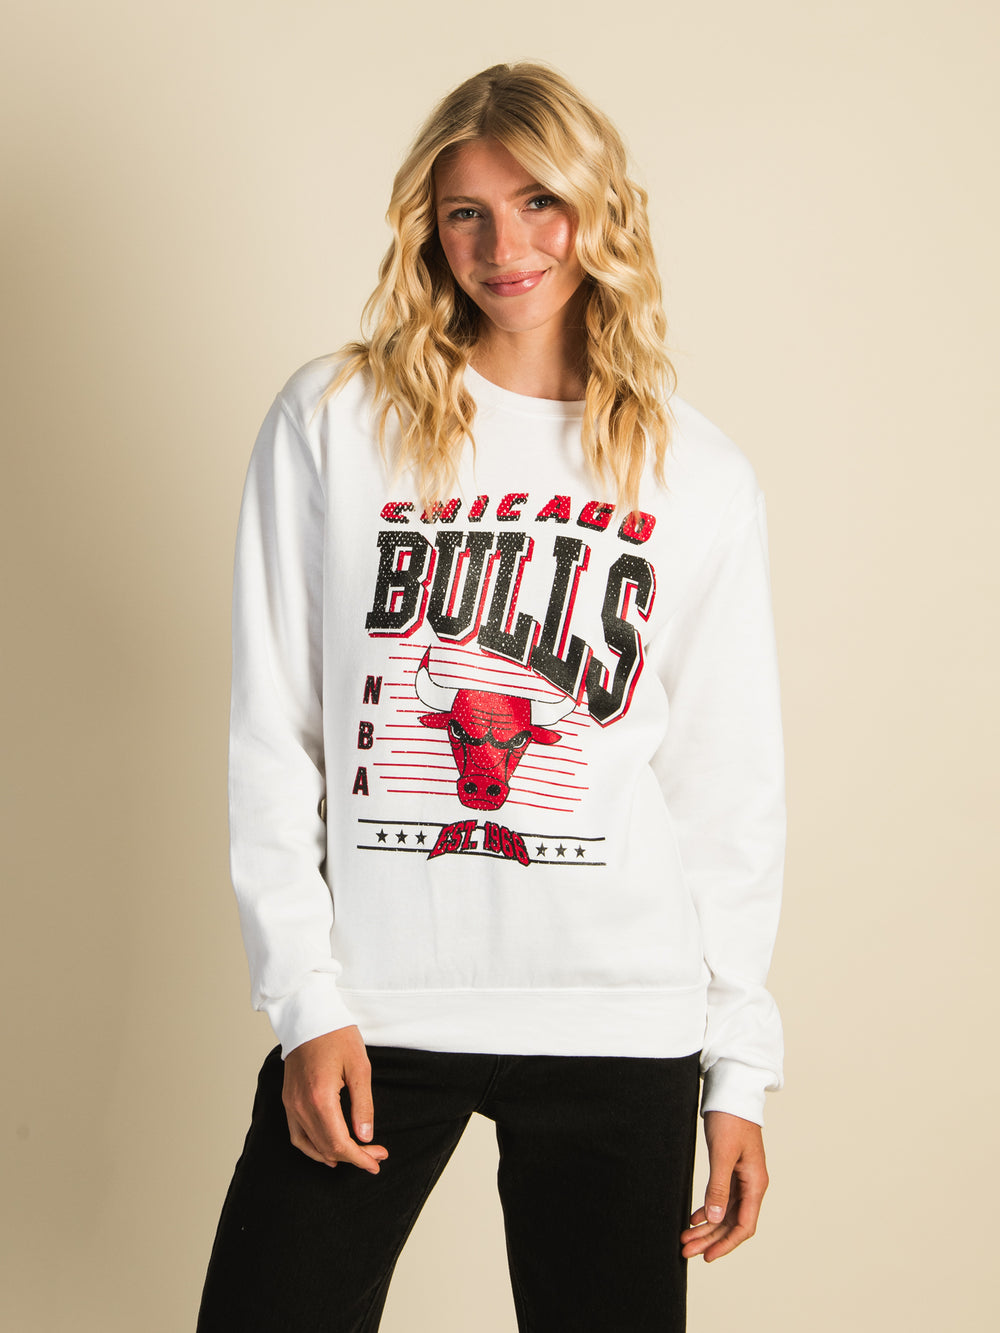 Off-White C O Chicago Bulls T-Shirt, hoodie, sweater and long sleeve